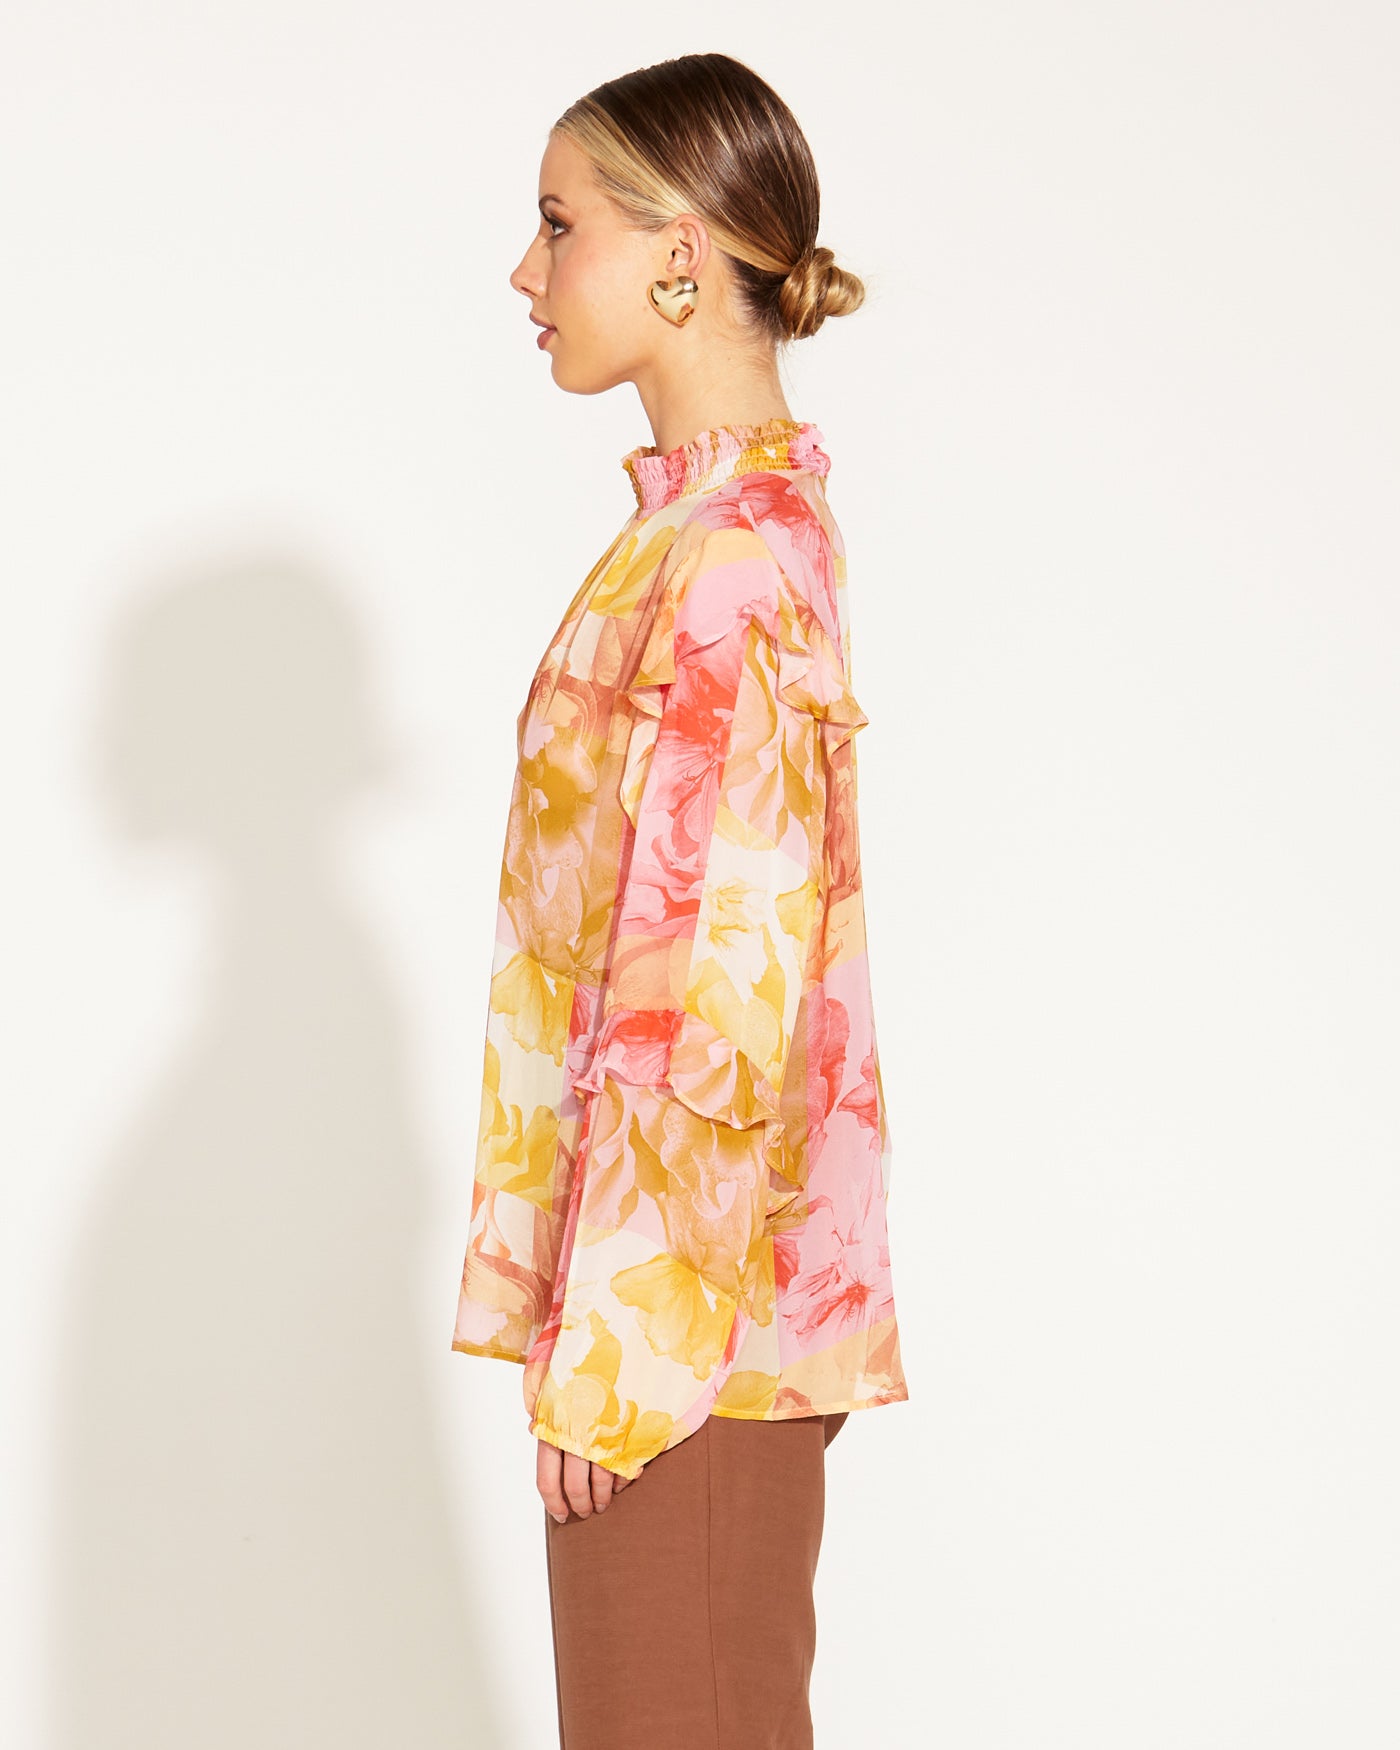 Fate+Becker Earthly Paradise Long Sleeve Sheer Blouse - Paradise Floral